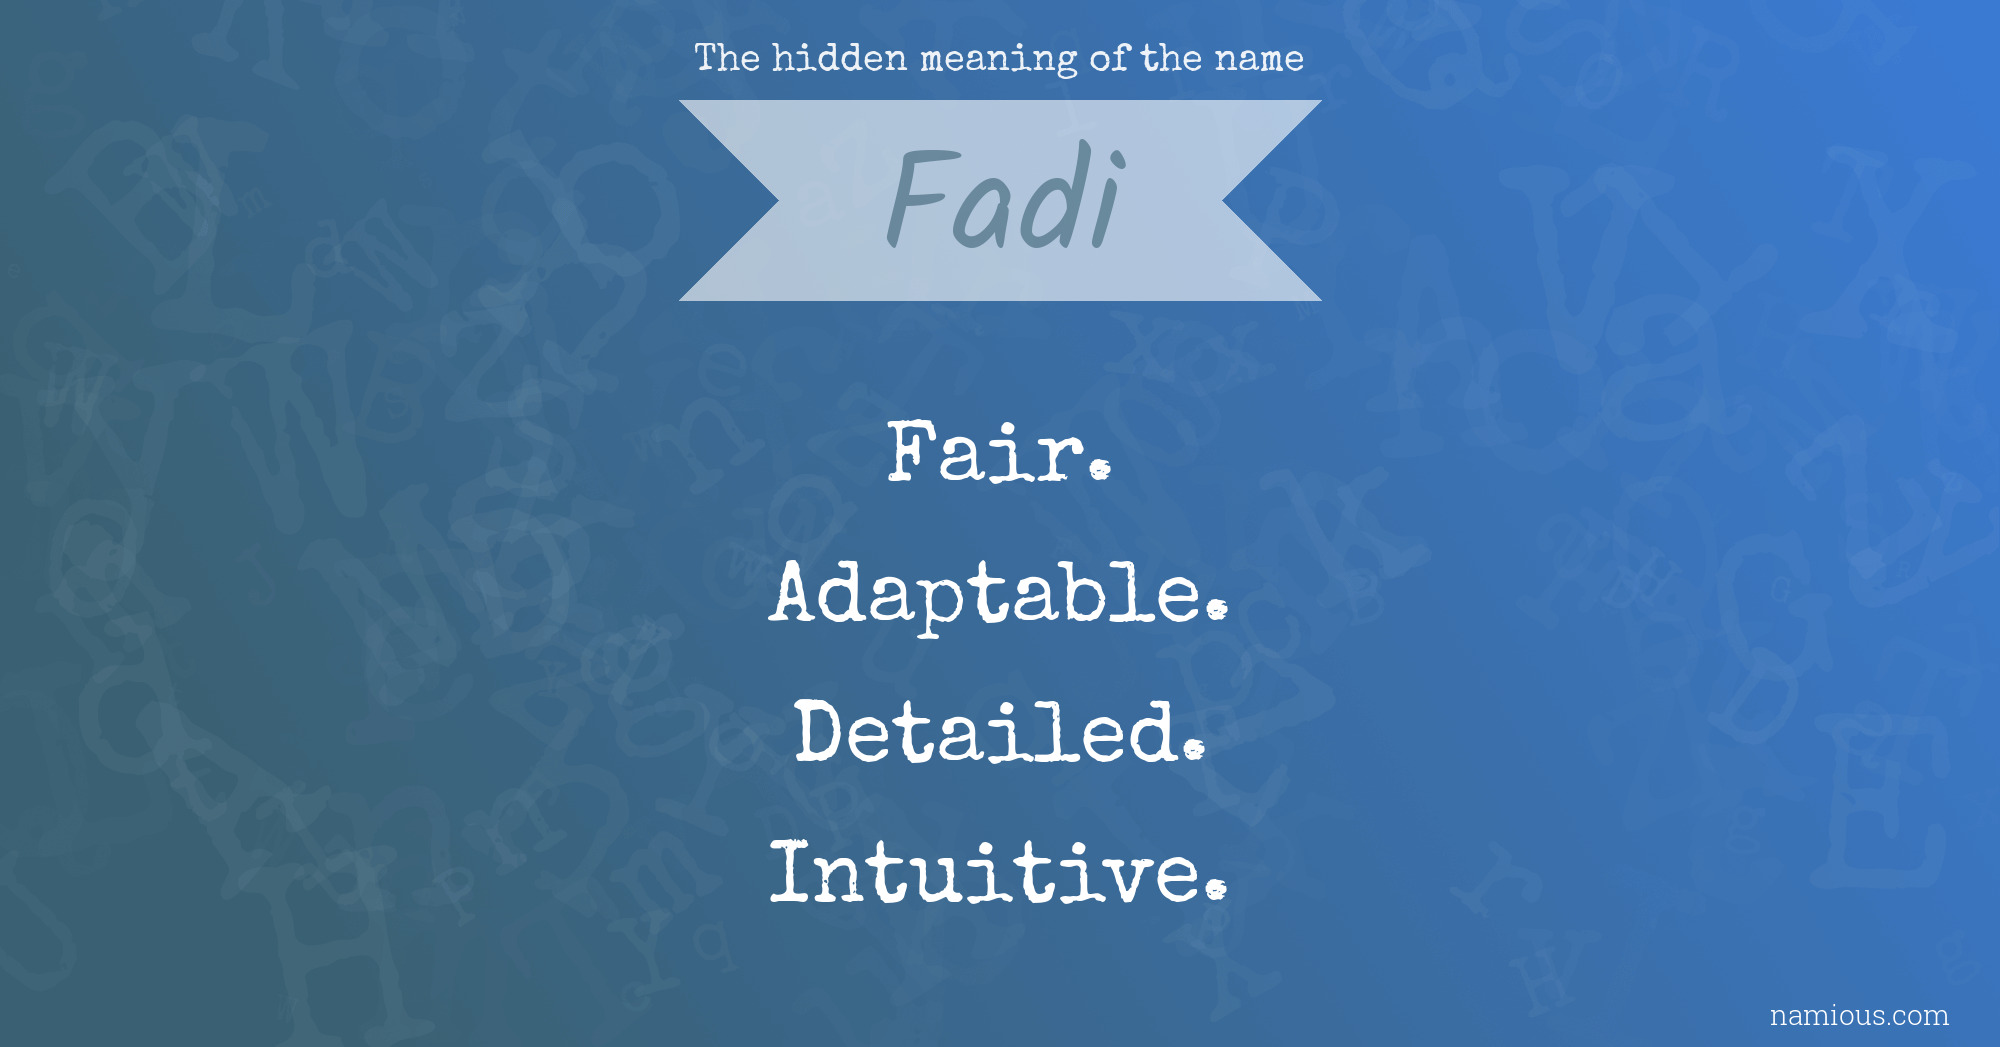 The hidden meaning of the name Fadi